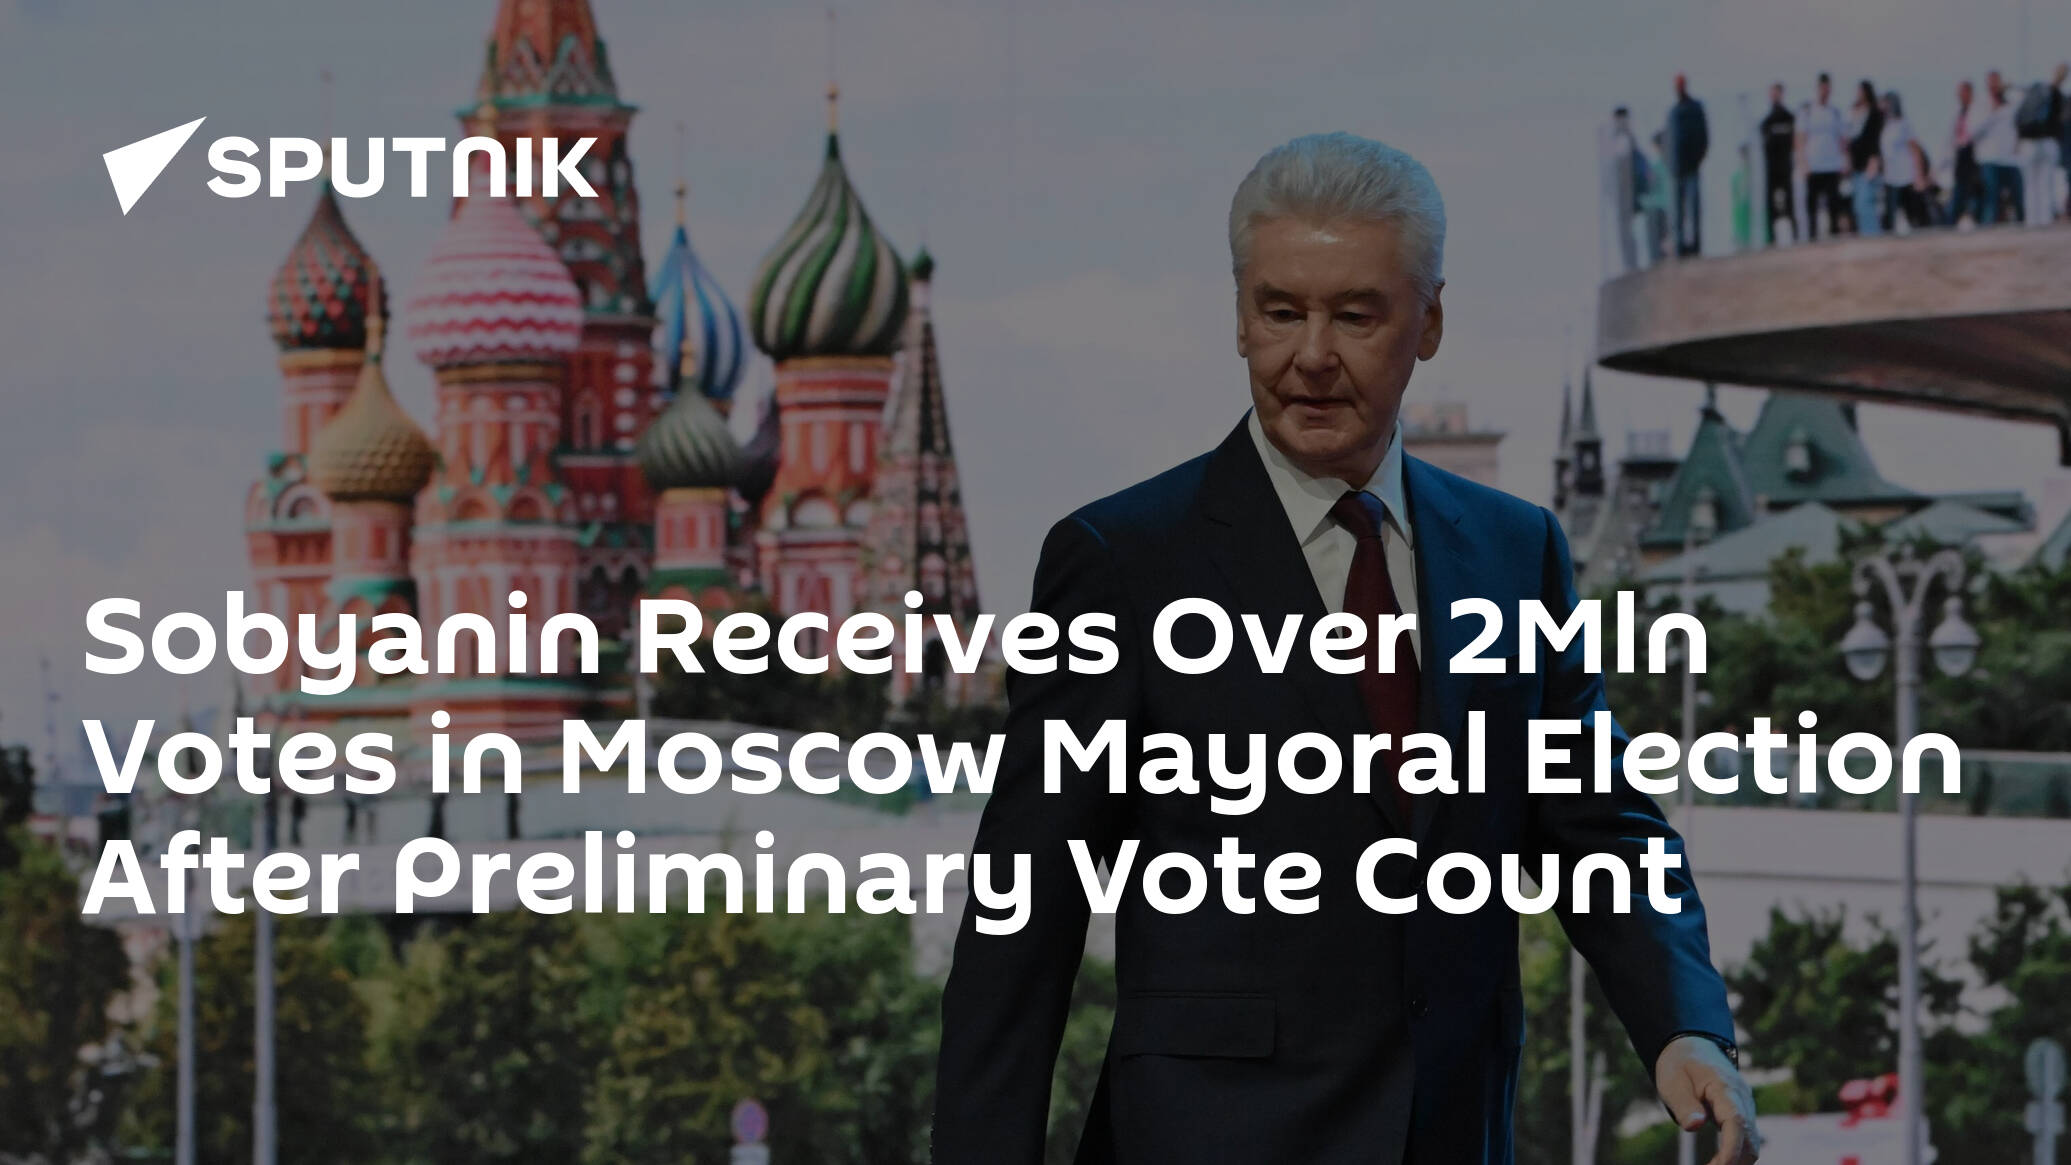 Sobyanin Receives Over 2Mln Votes in Moscow Mayoral Election After Preliminary Vote Count